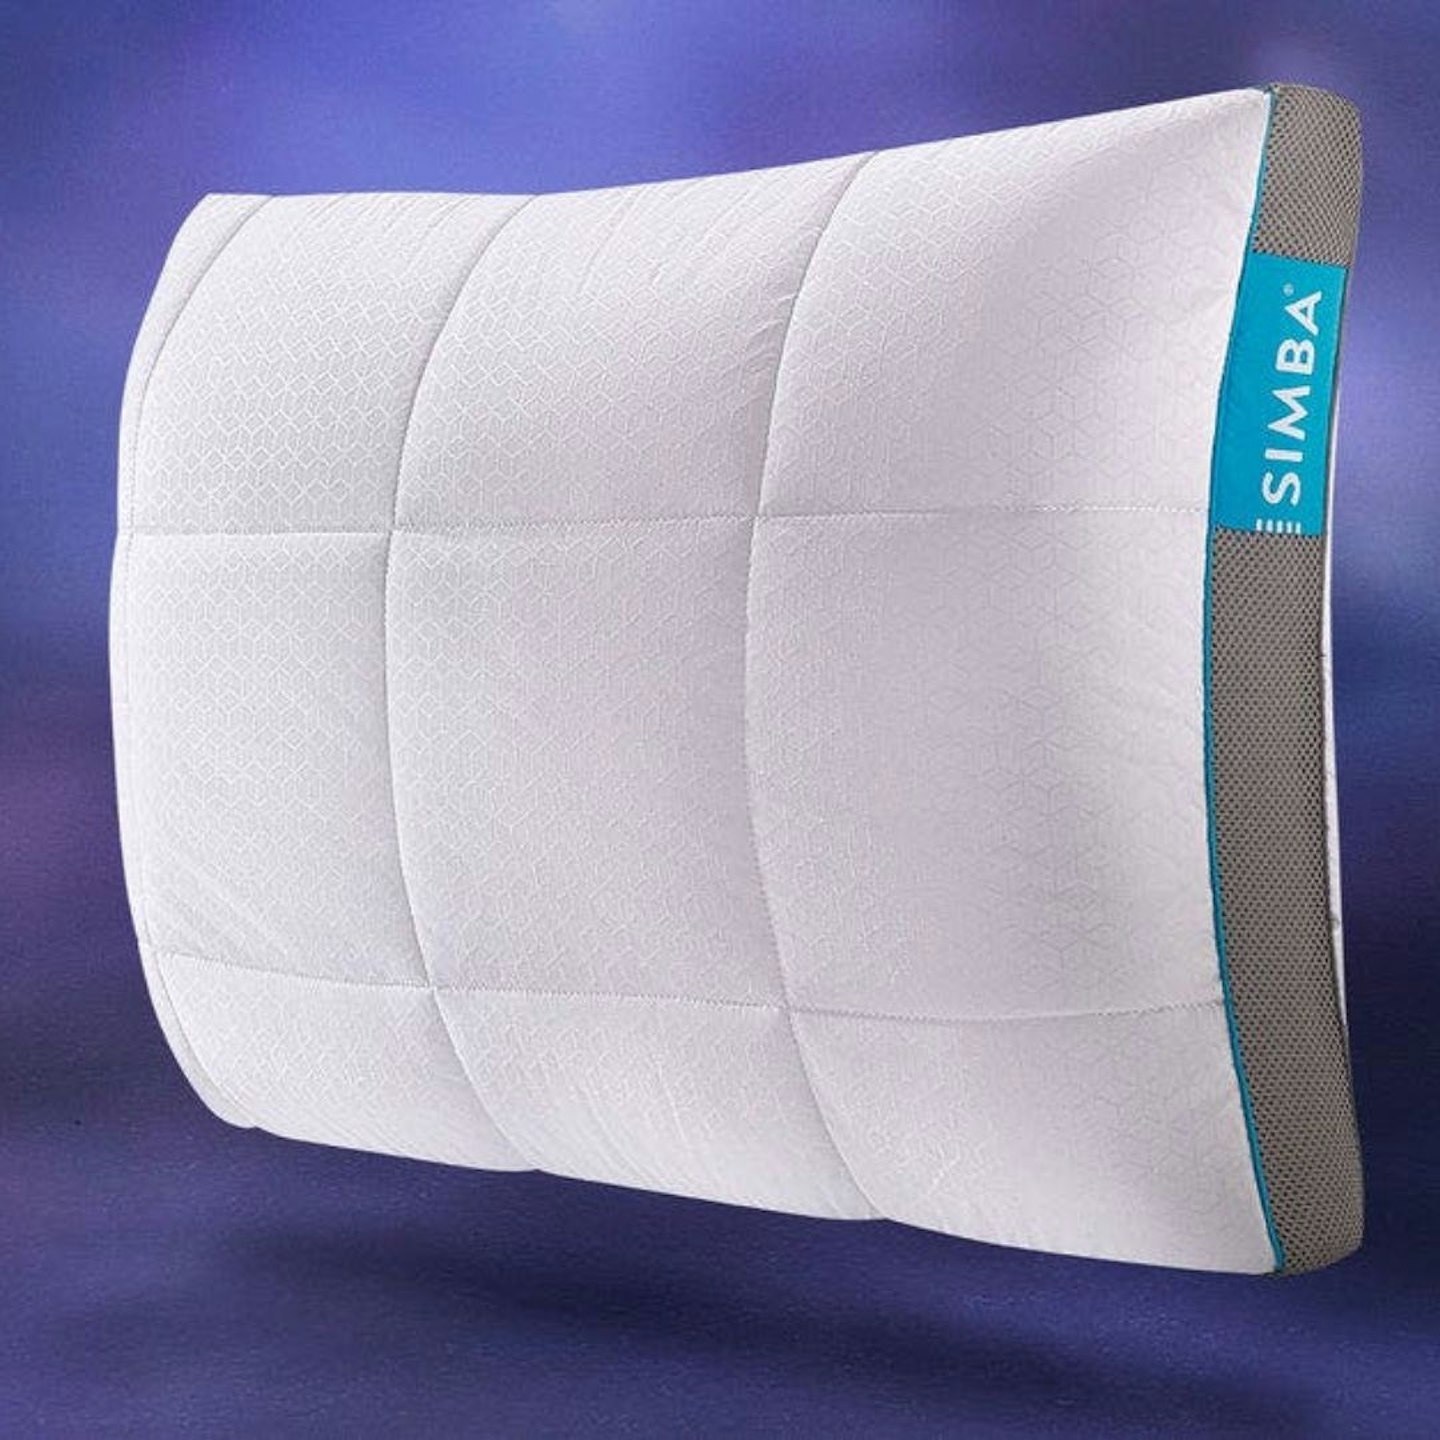 The best pillows for neck pain: THE SIMBA Hybrid® Firm Pillow